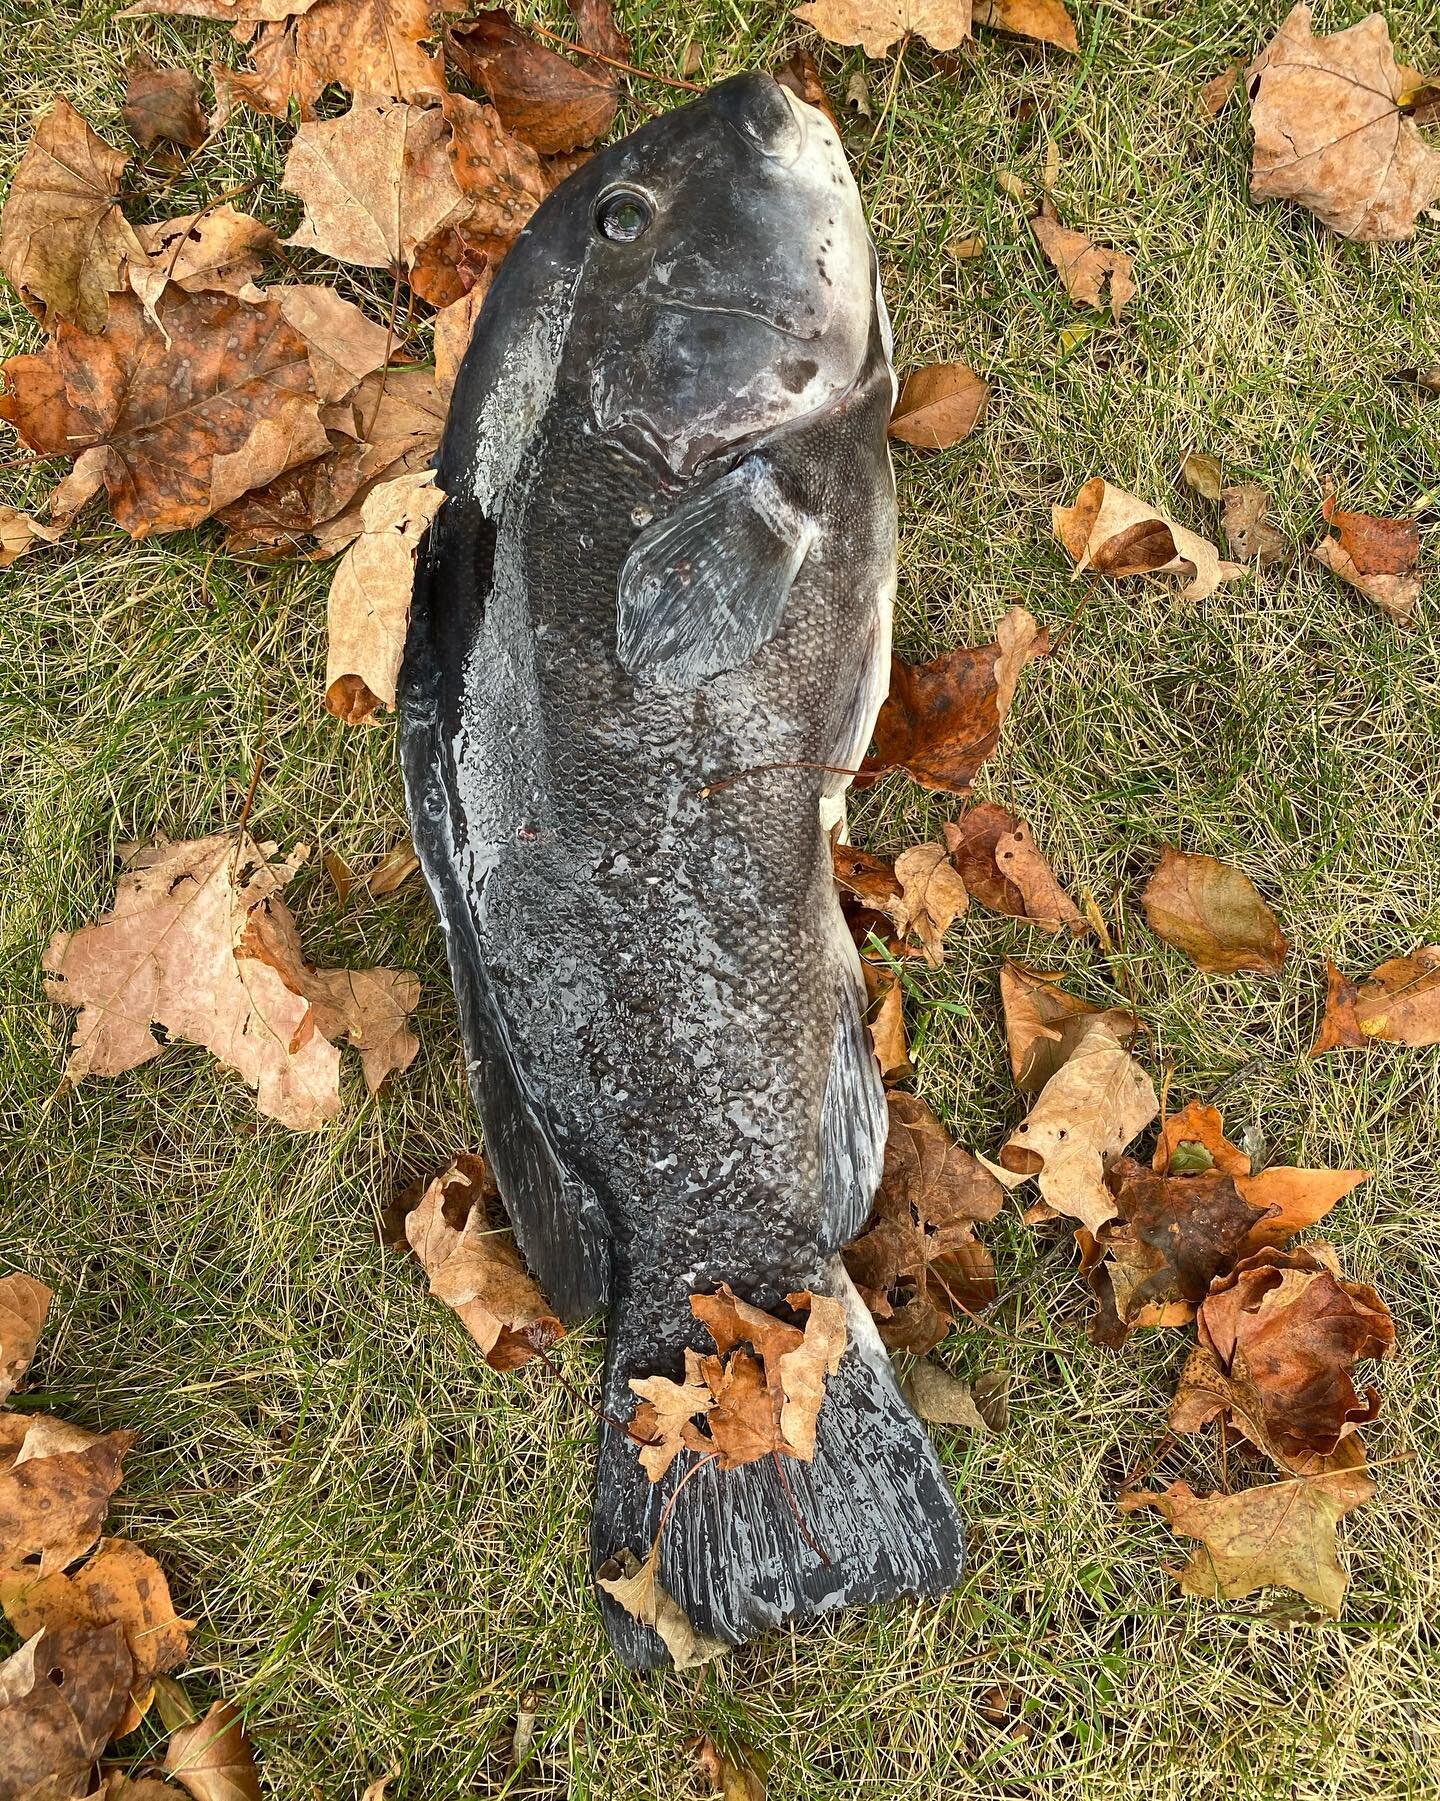 October is national seafood month for a reason, its one of the best times to enjoy local seafood. And falling leaves and Tautog aka blackfish just seems to scream fall! This fish was caught recreationally and given to me by a friend but the commercia